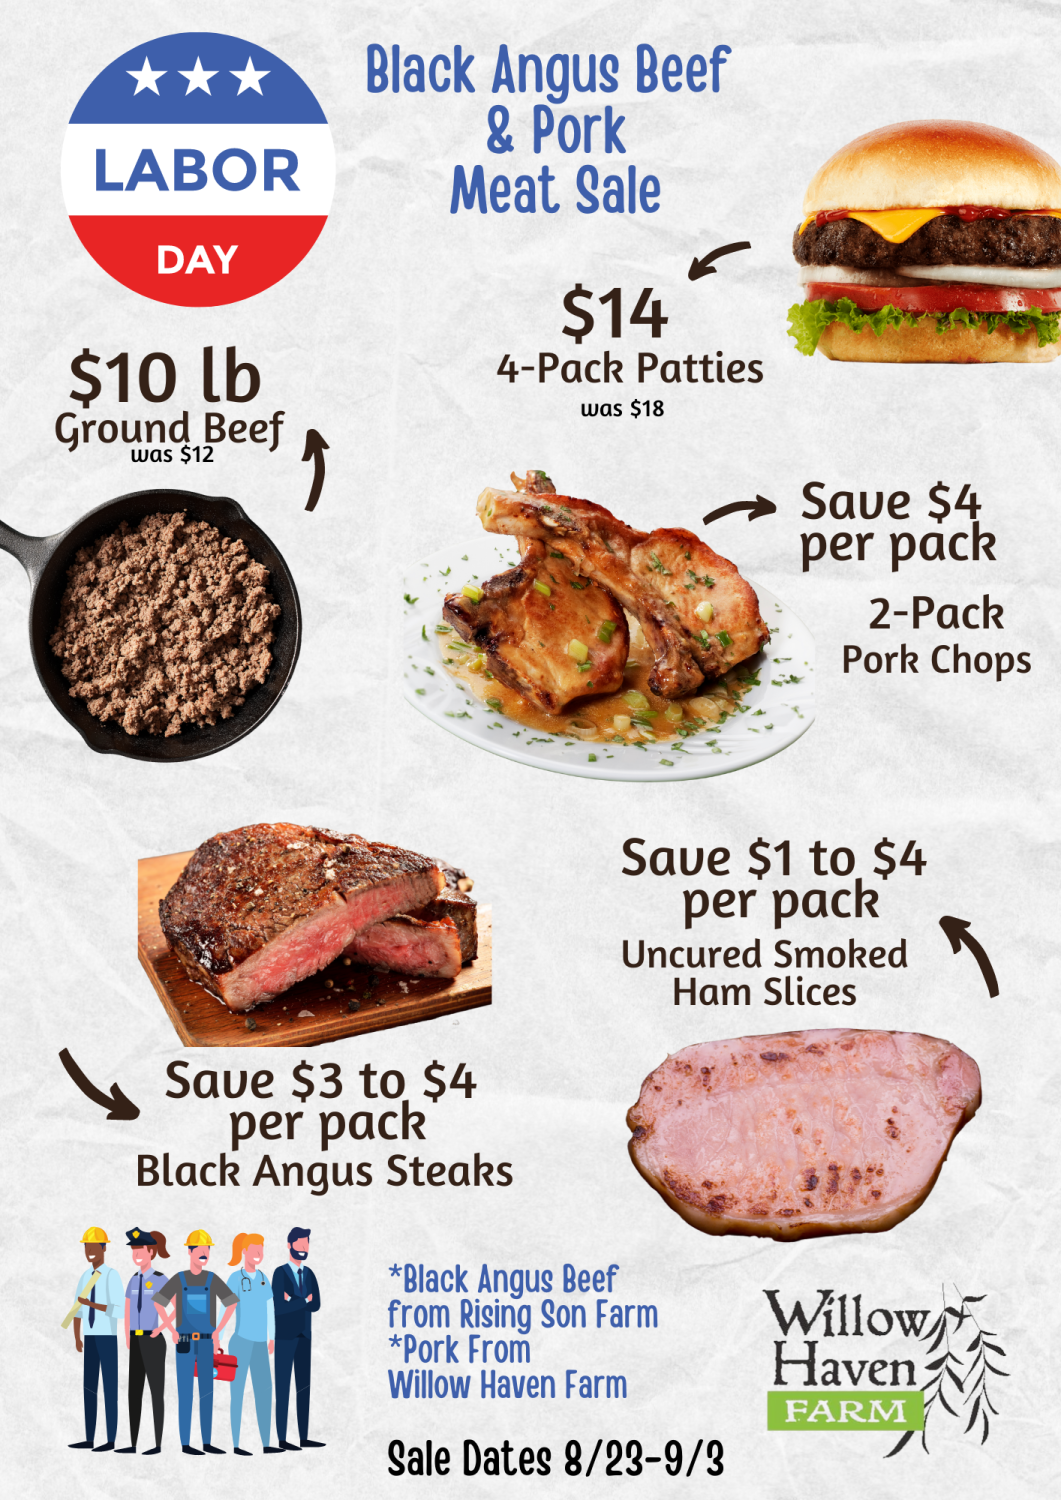 Next Happening: Labor Day Meat Sale- It's Big, Don't miss out!